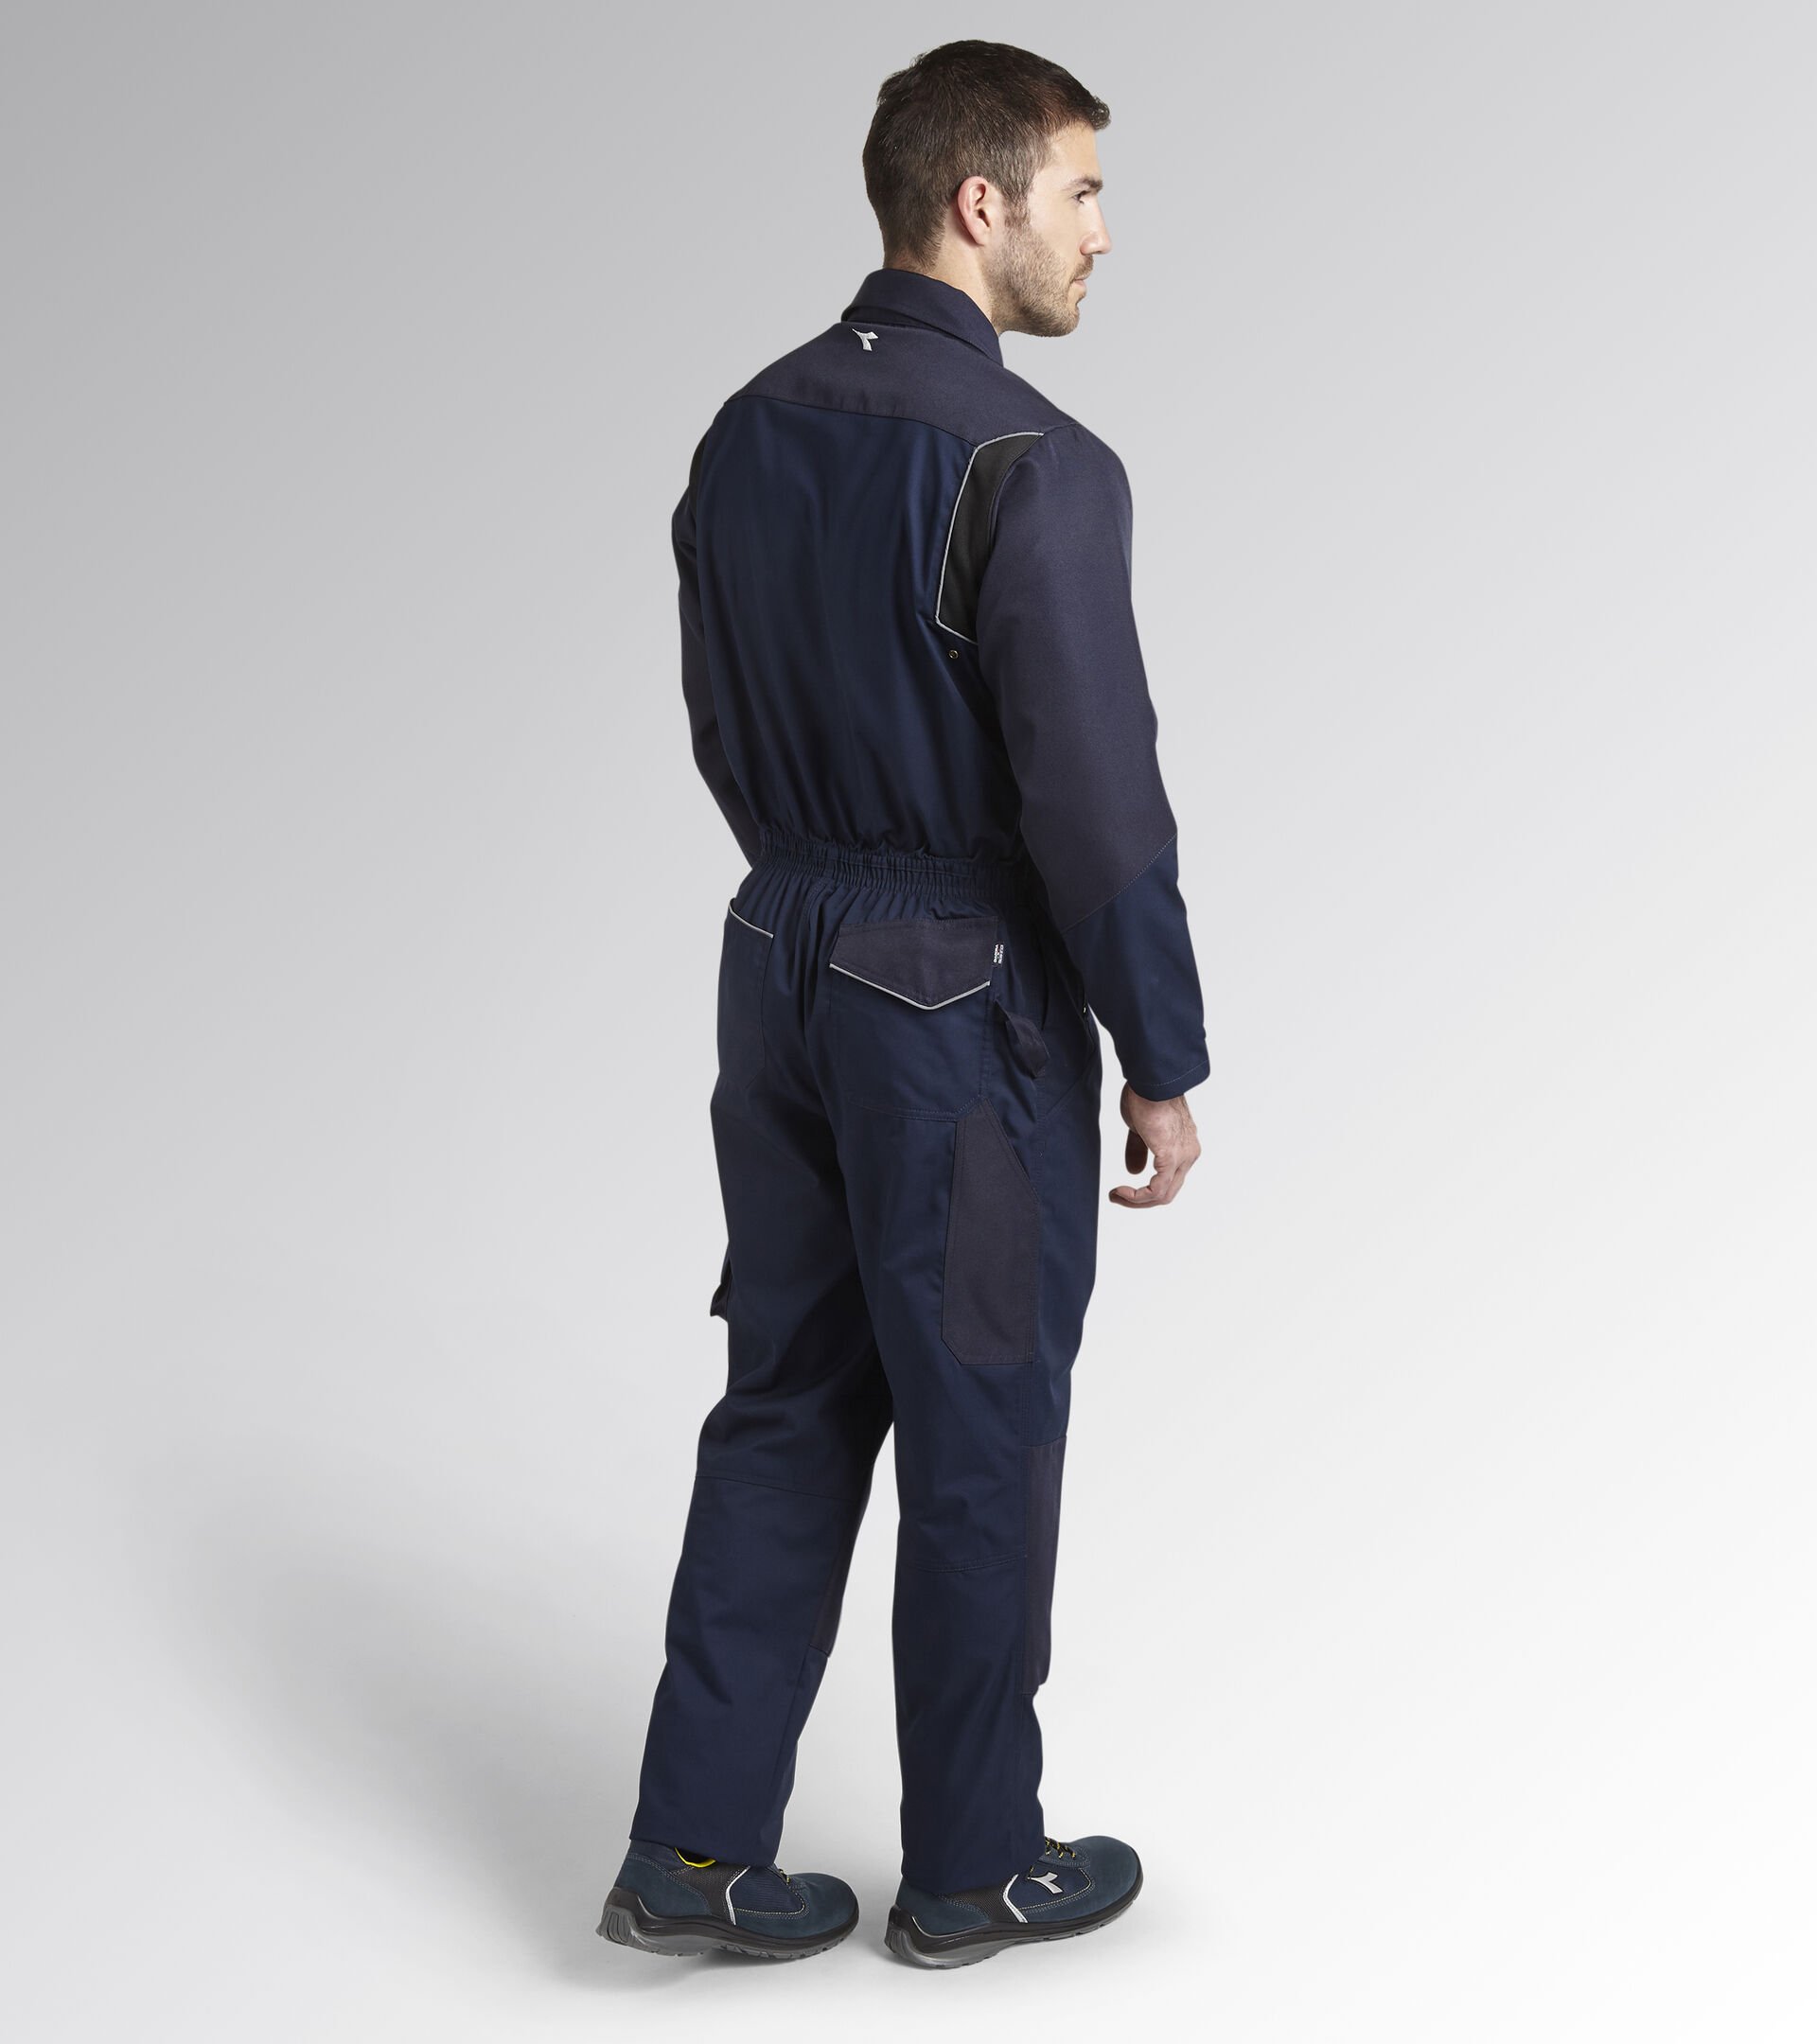 Work coveralls COVERALL POLY CLASSIC NAVY - Utility